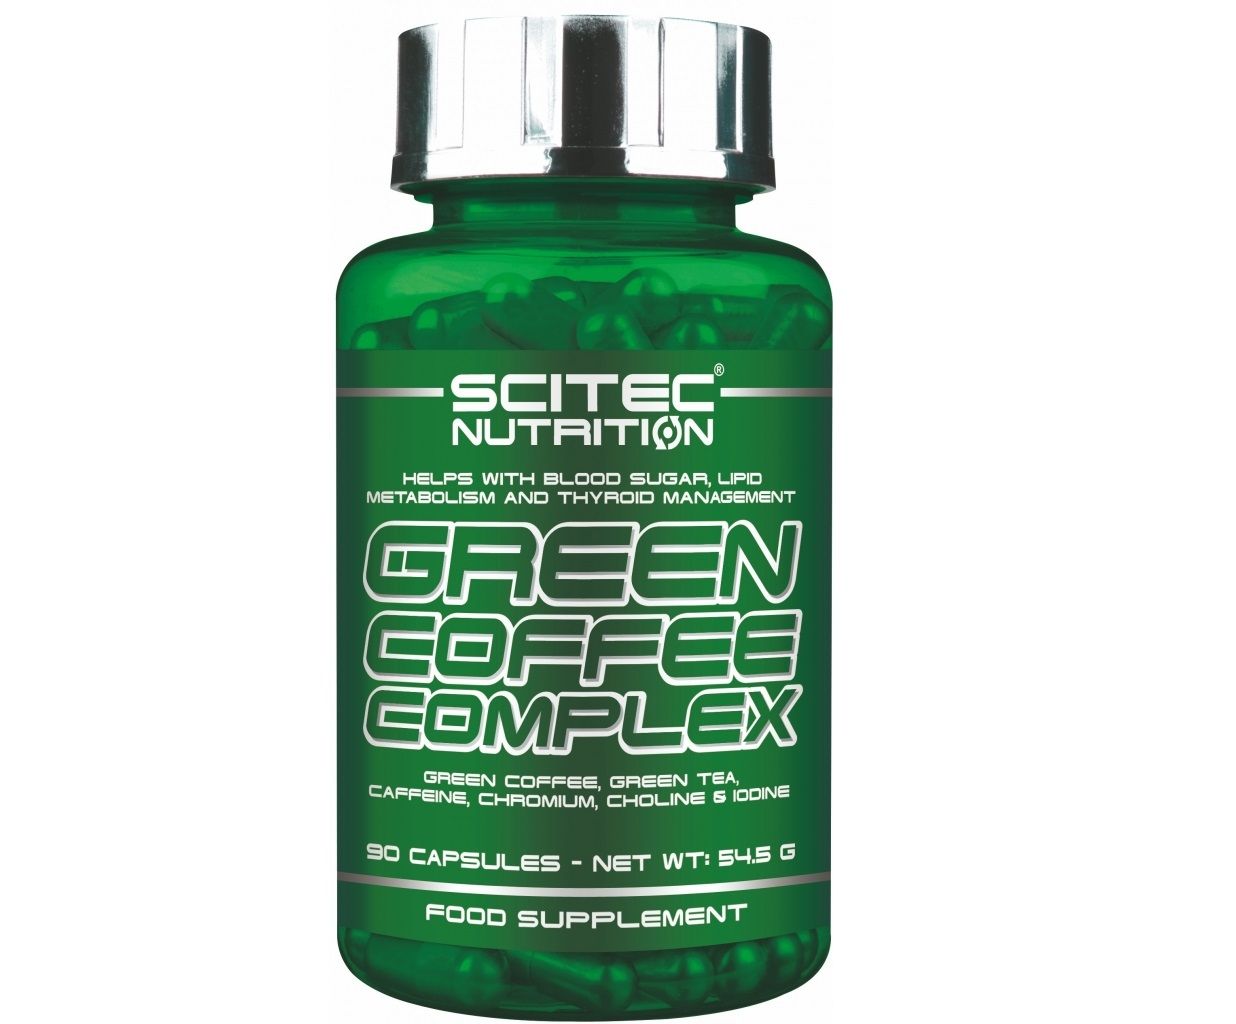 Green Coffee Complex 90 tab - Scitec Nutrition unflavored